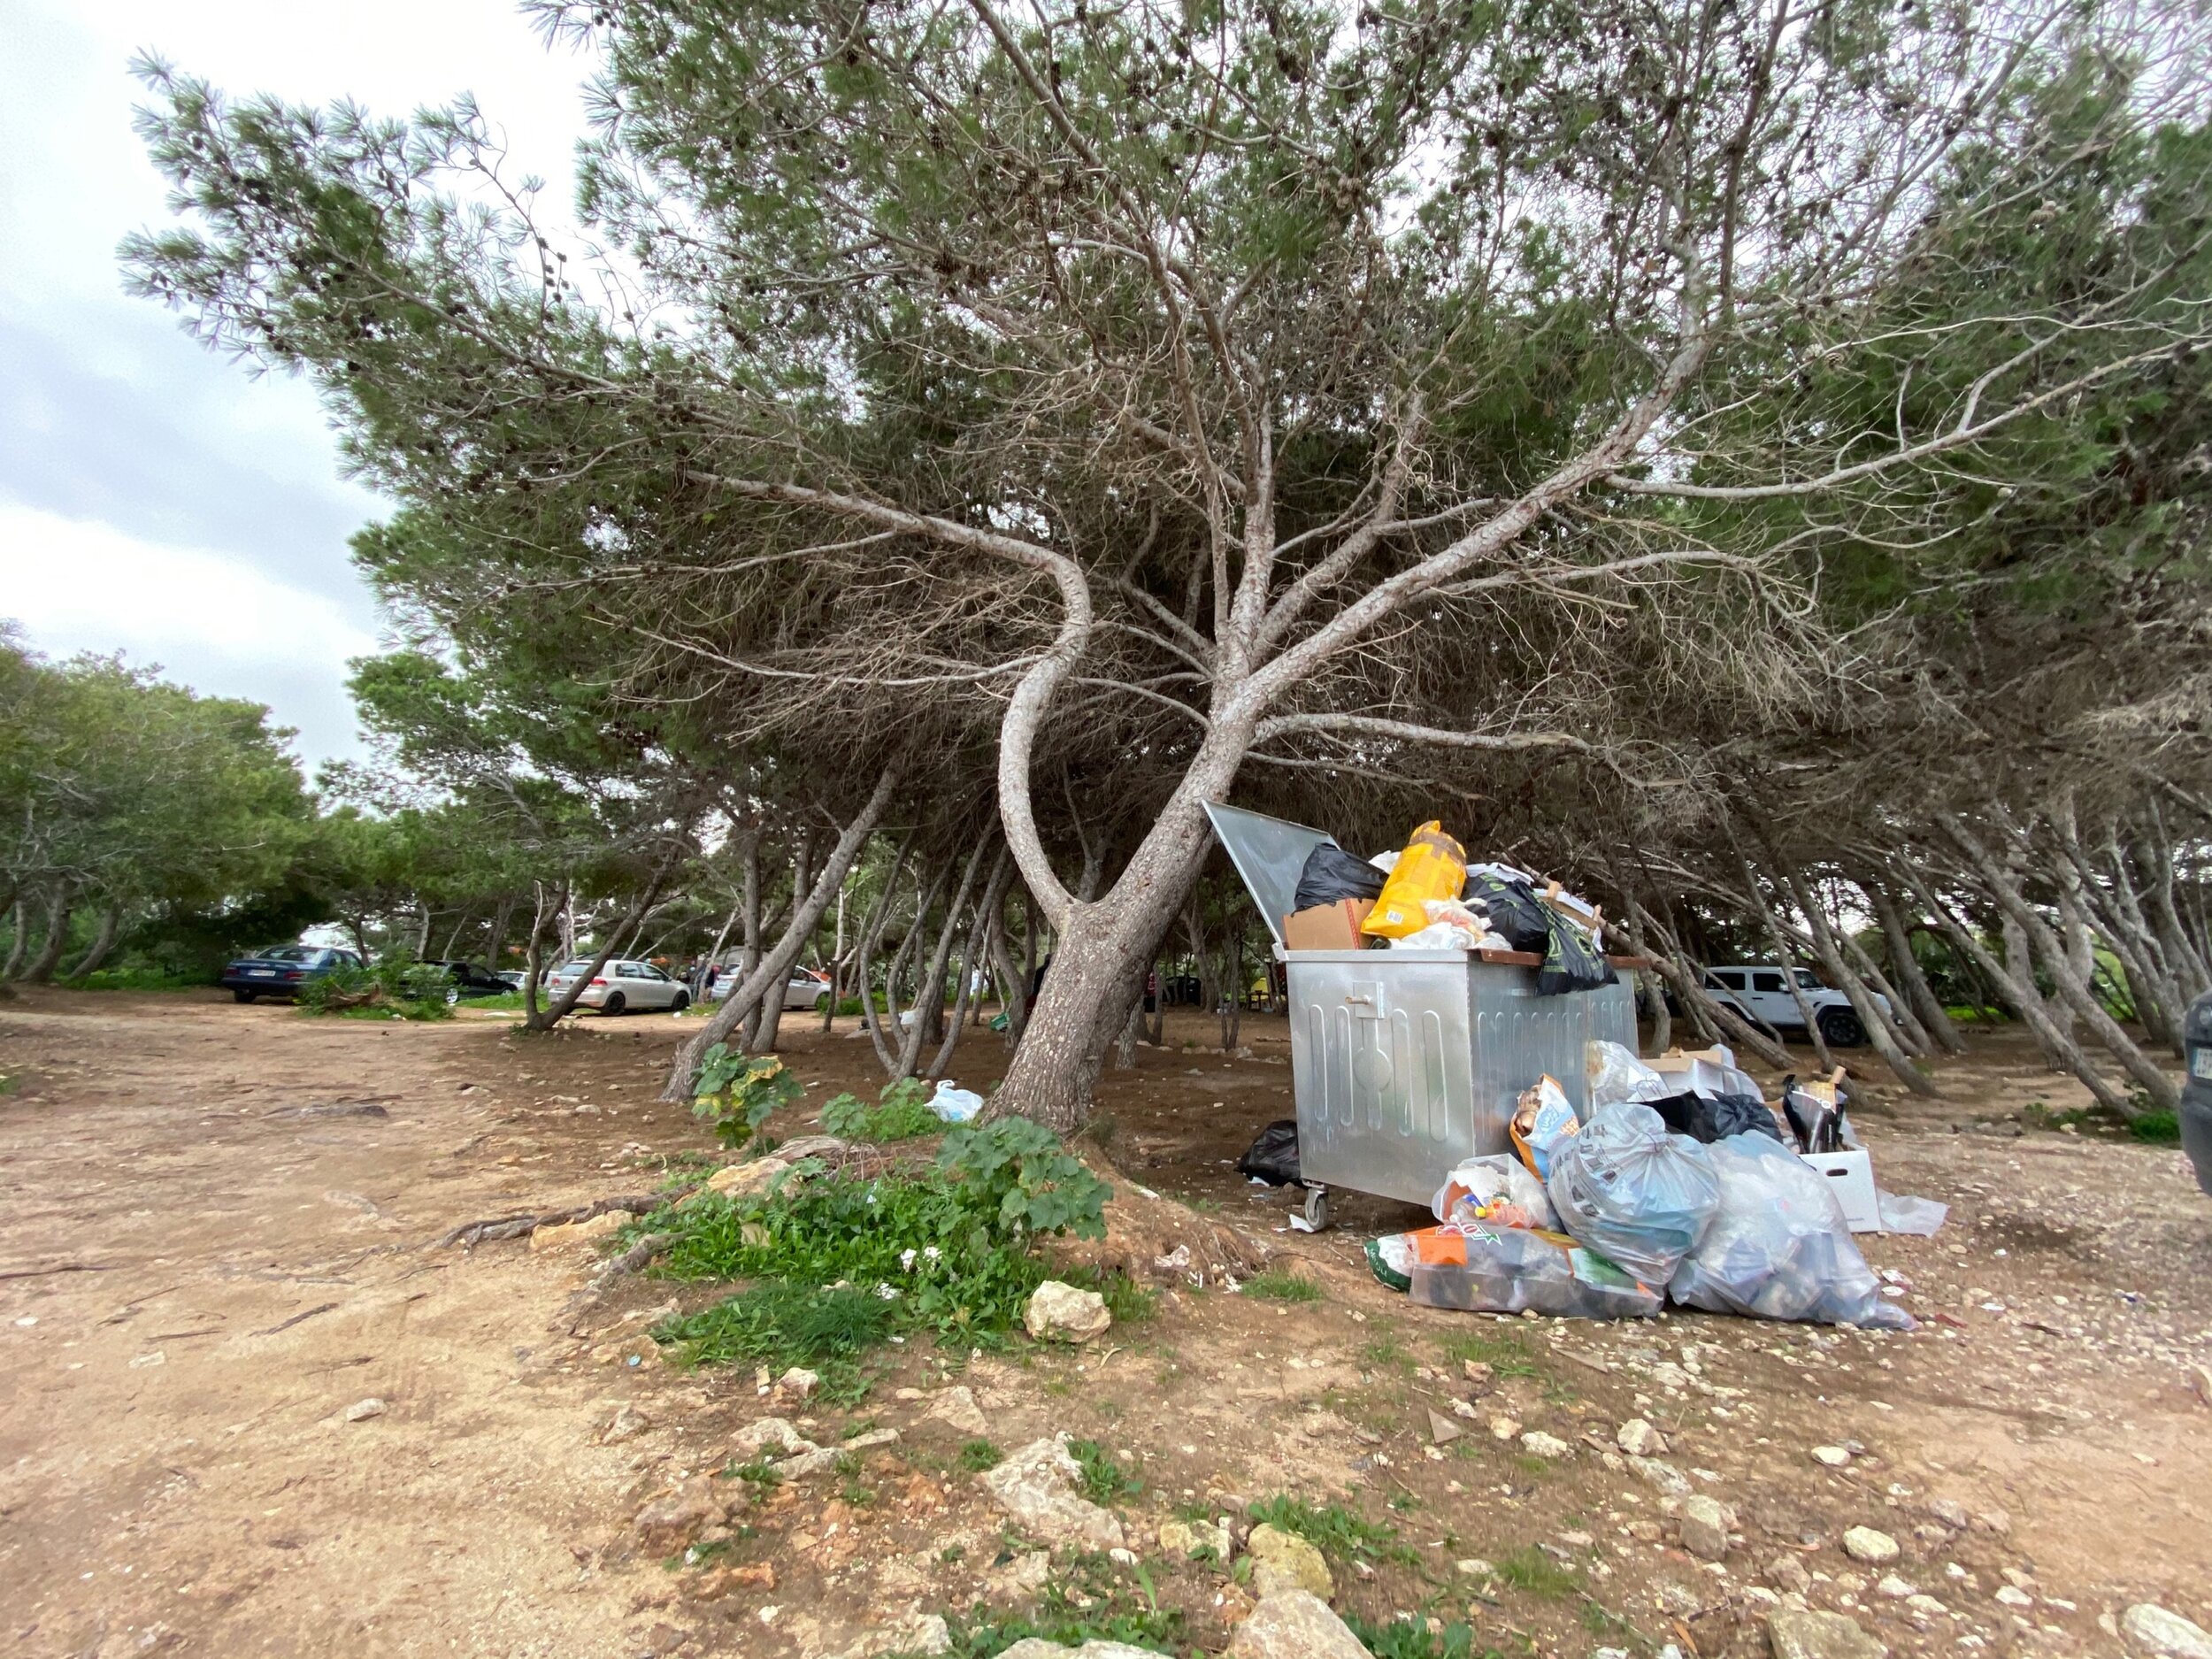 The aftermath of camping, DINGLI PRIMARY SCHOOL, Malta.jpg